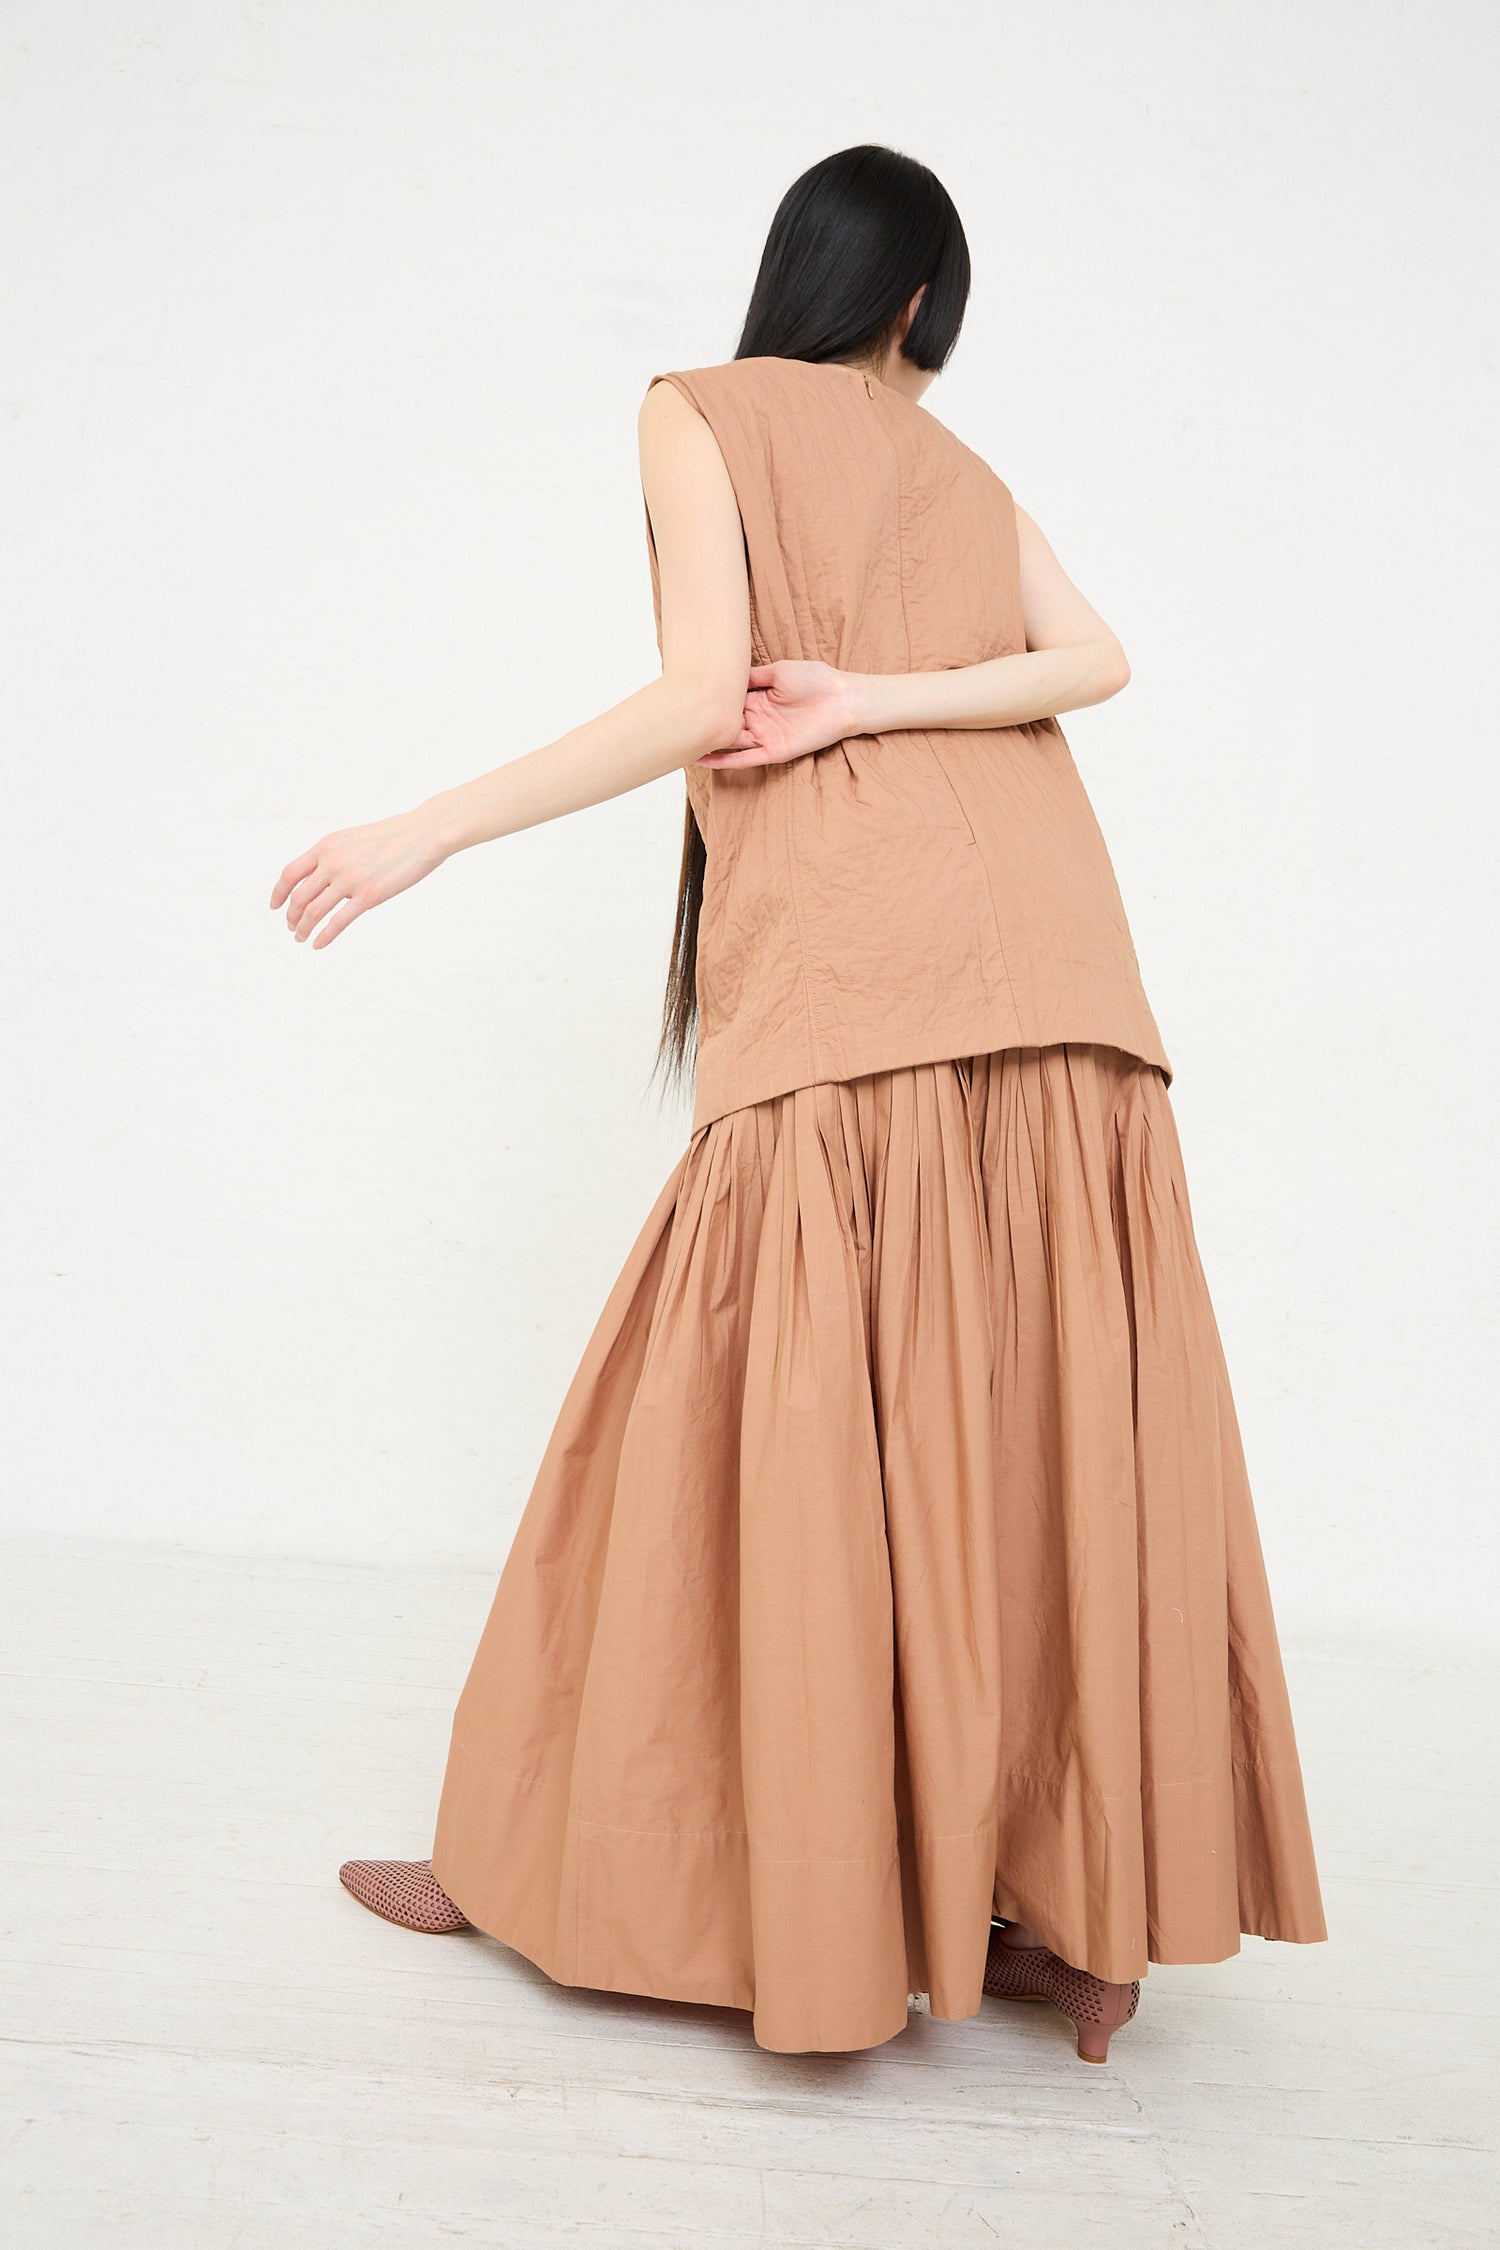 A woman seen from behind wearing a Calin Dress in Camel by Rachel Comey, with her arm outstretched.